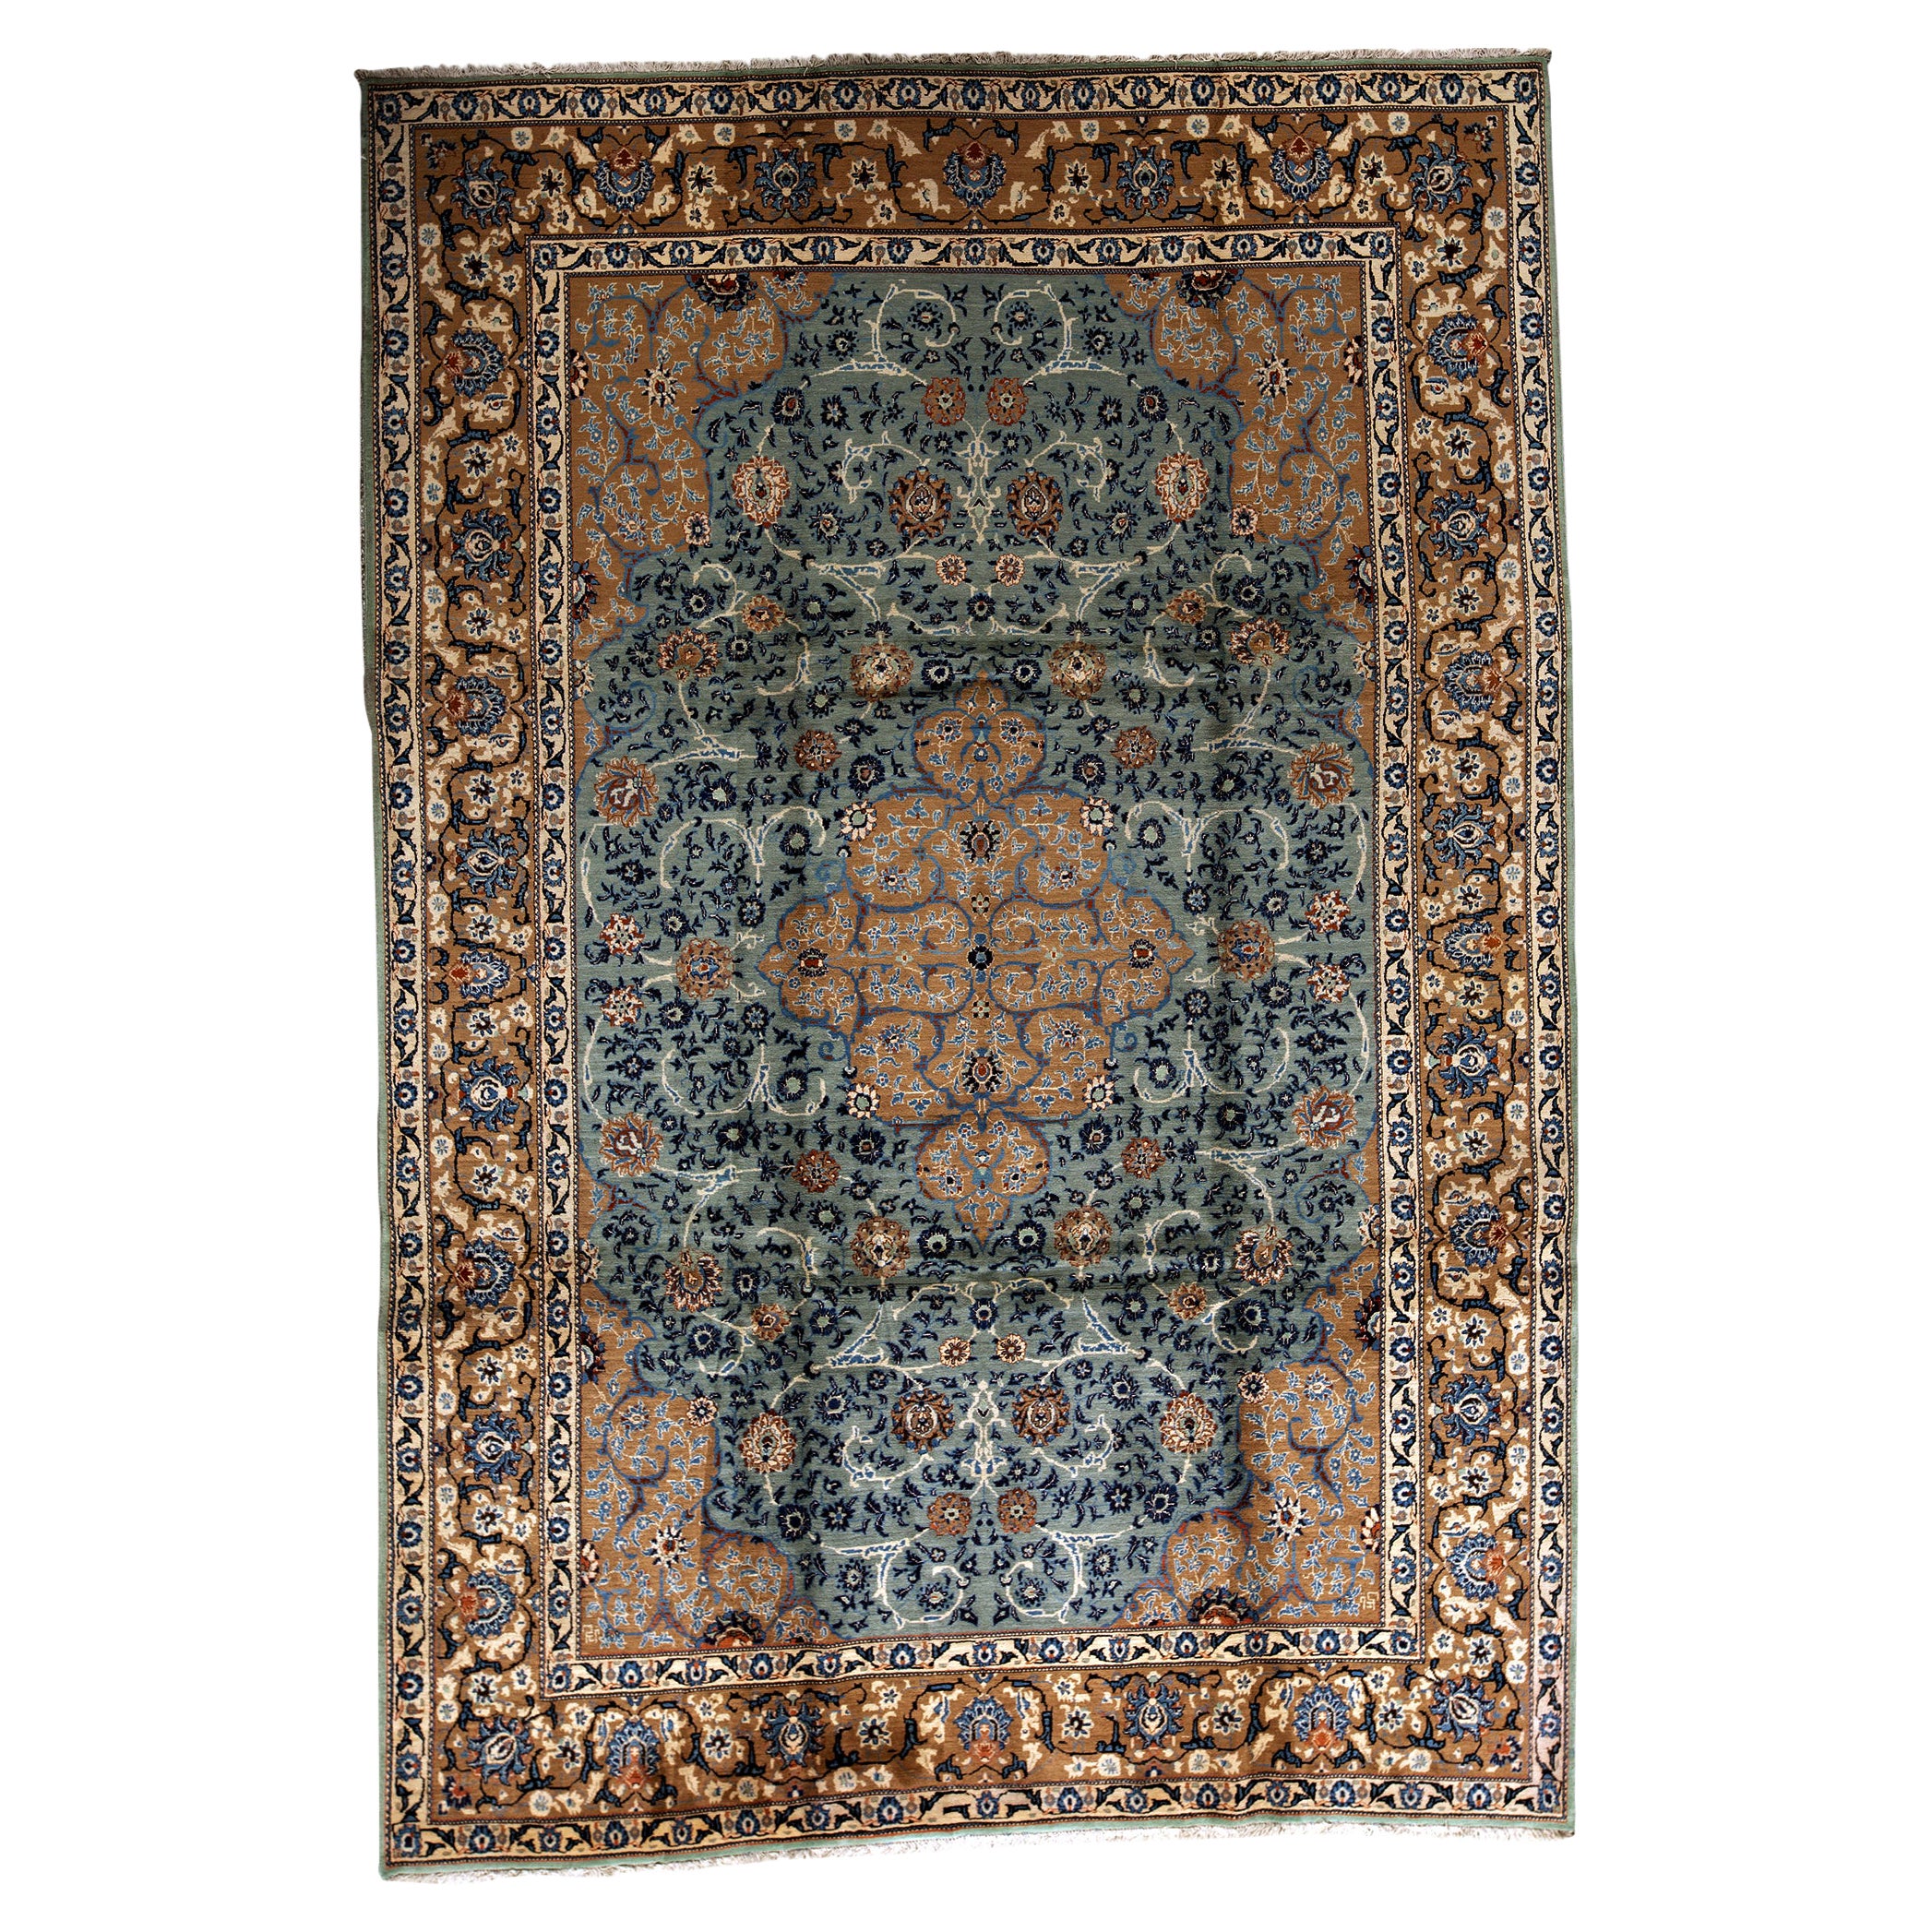 Antique Persian Fine Traditional Handwoven Luxury Wool Brown Rug